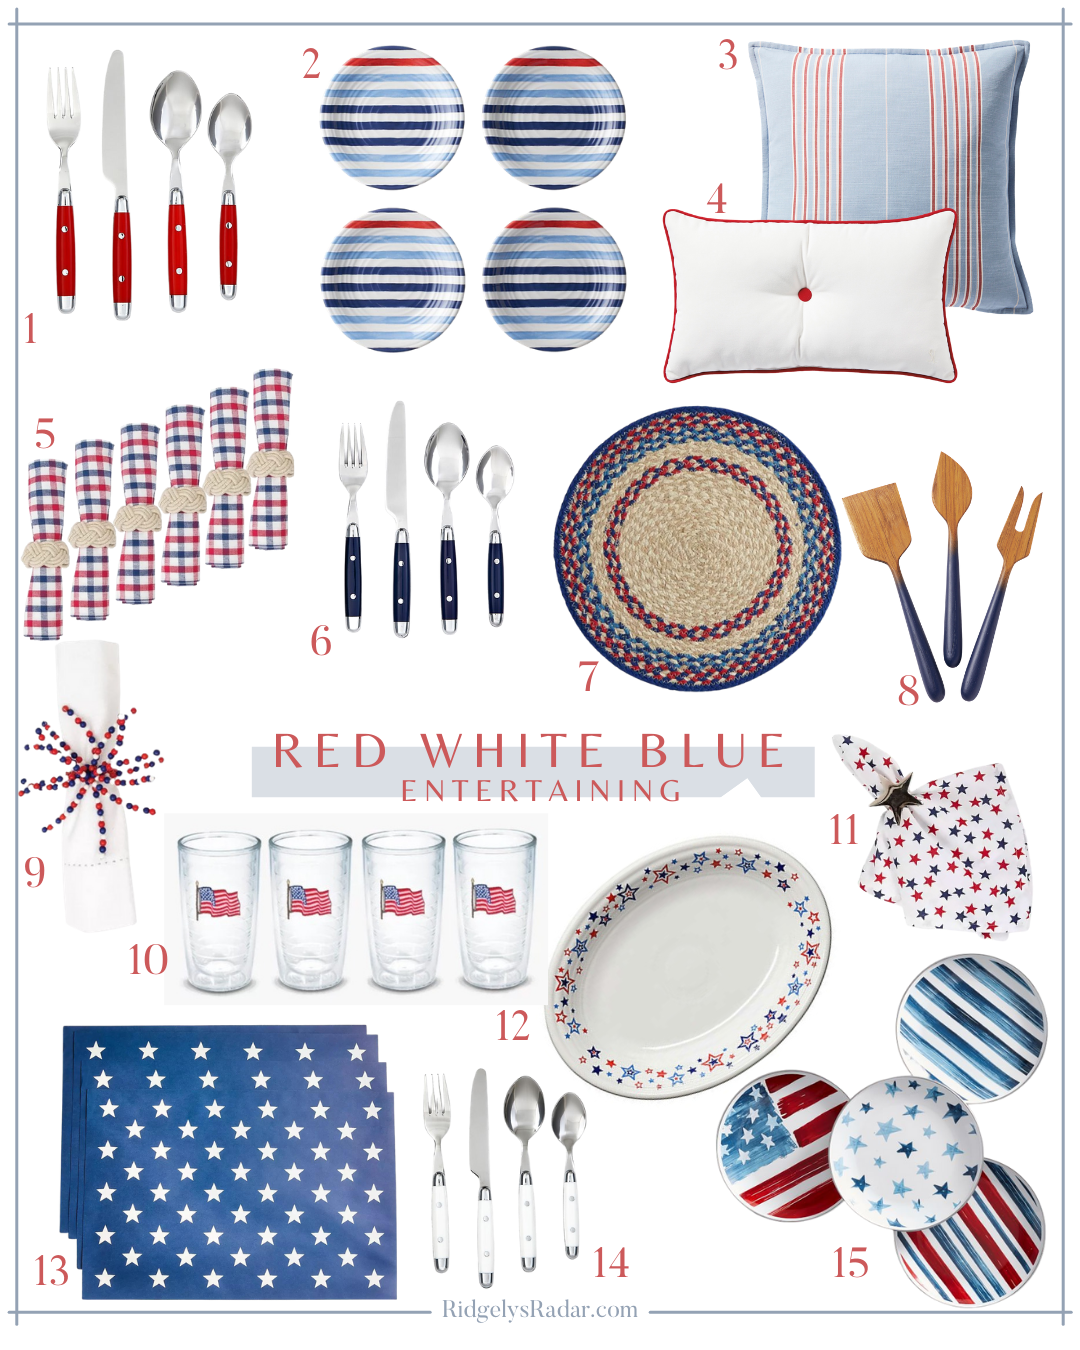 Its almost time to entertain with red, white and blue! Get ready for the Memorial Day Weekend with these Festive tabletop pieces! 